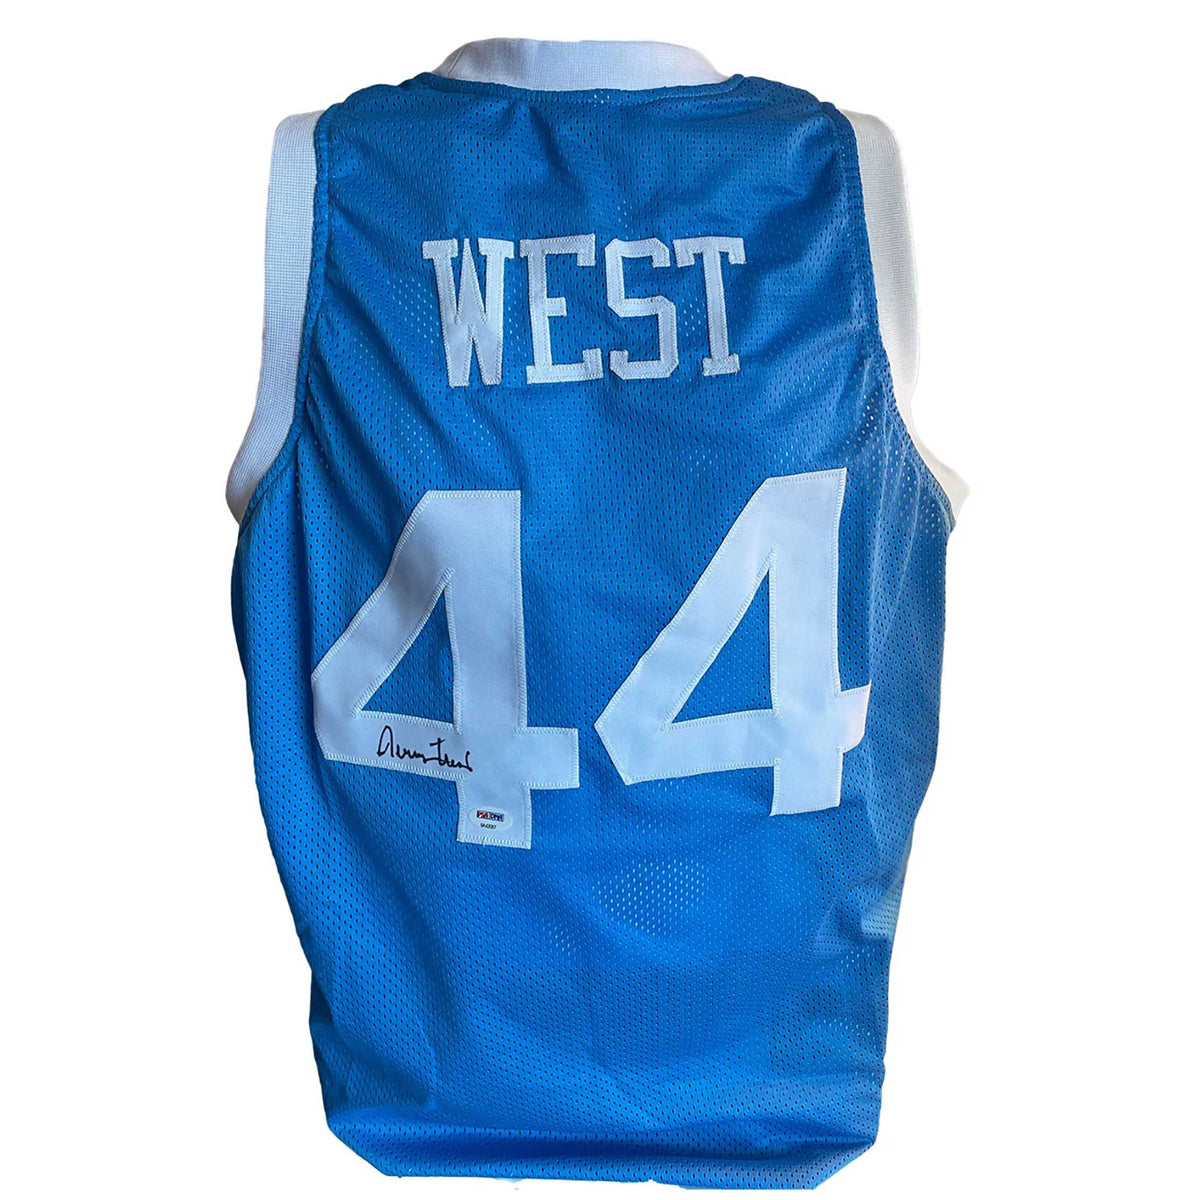 Tristar Jerry West Autographed Los Angeles Lakers Blue M&N Swingman Jersey Inscribed The Logo